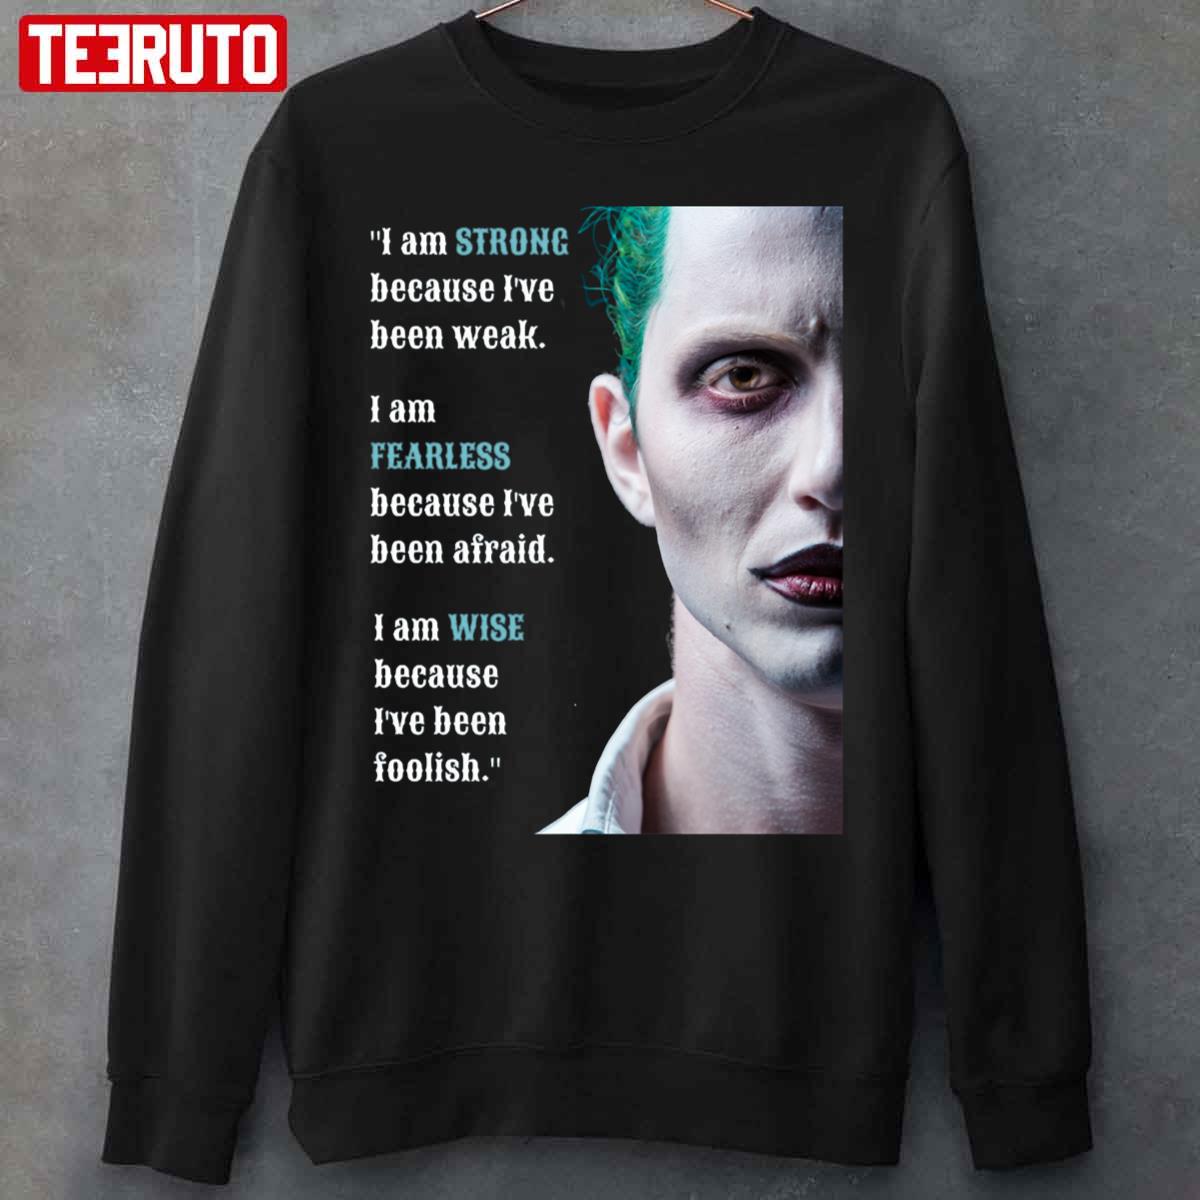 You Are Beautiful You Are Strong You Are Loved You Belong Joker Unisex Sweatshirt